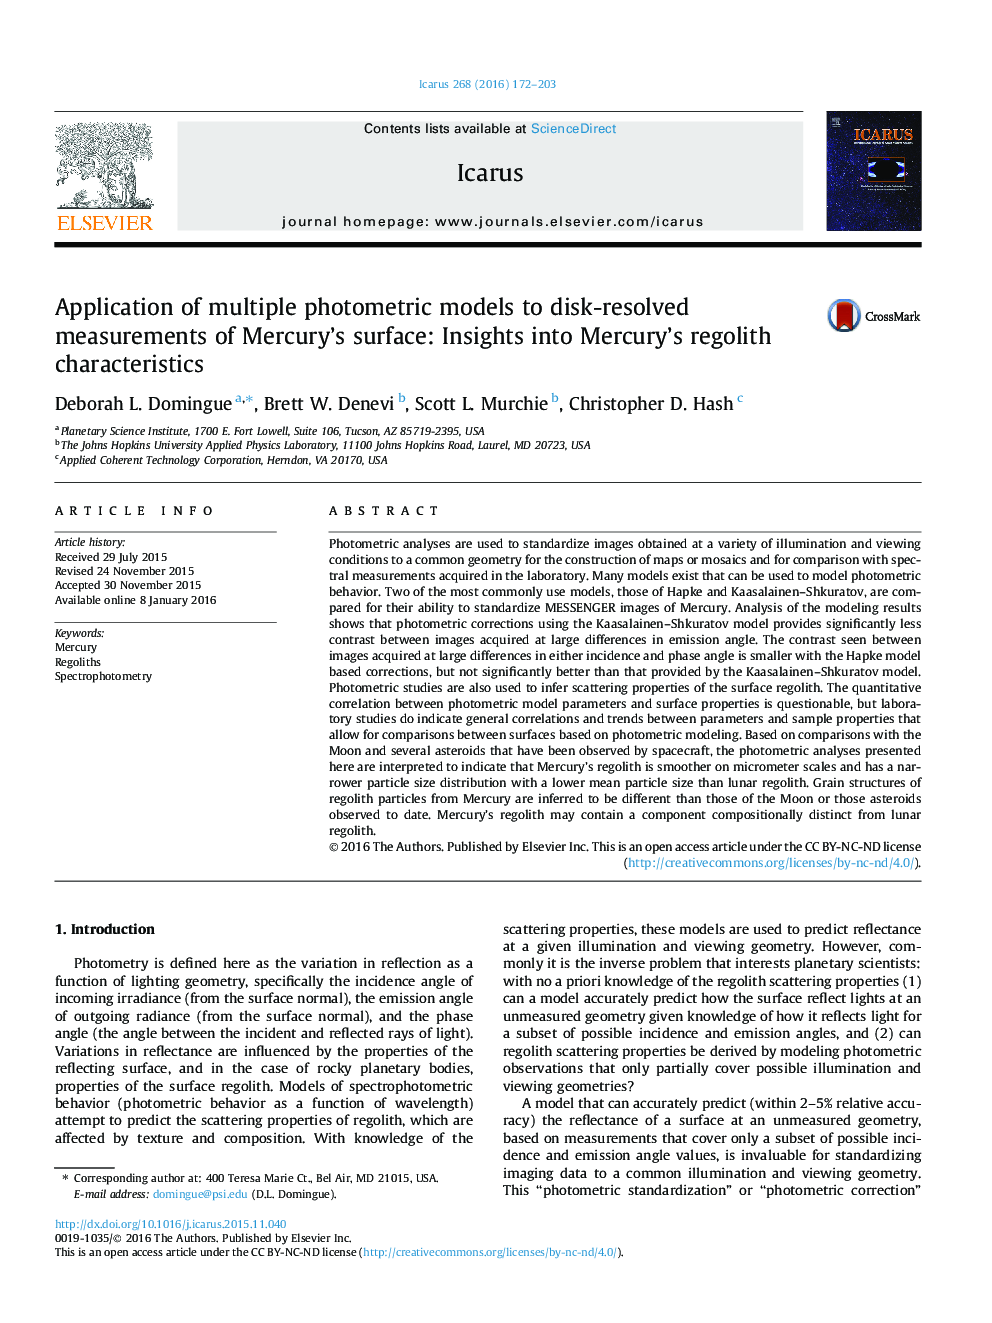 Application of multiple photometric models to disk-resolved measurements of Mercury's surface: Insights into Mercury's regolith characteristics